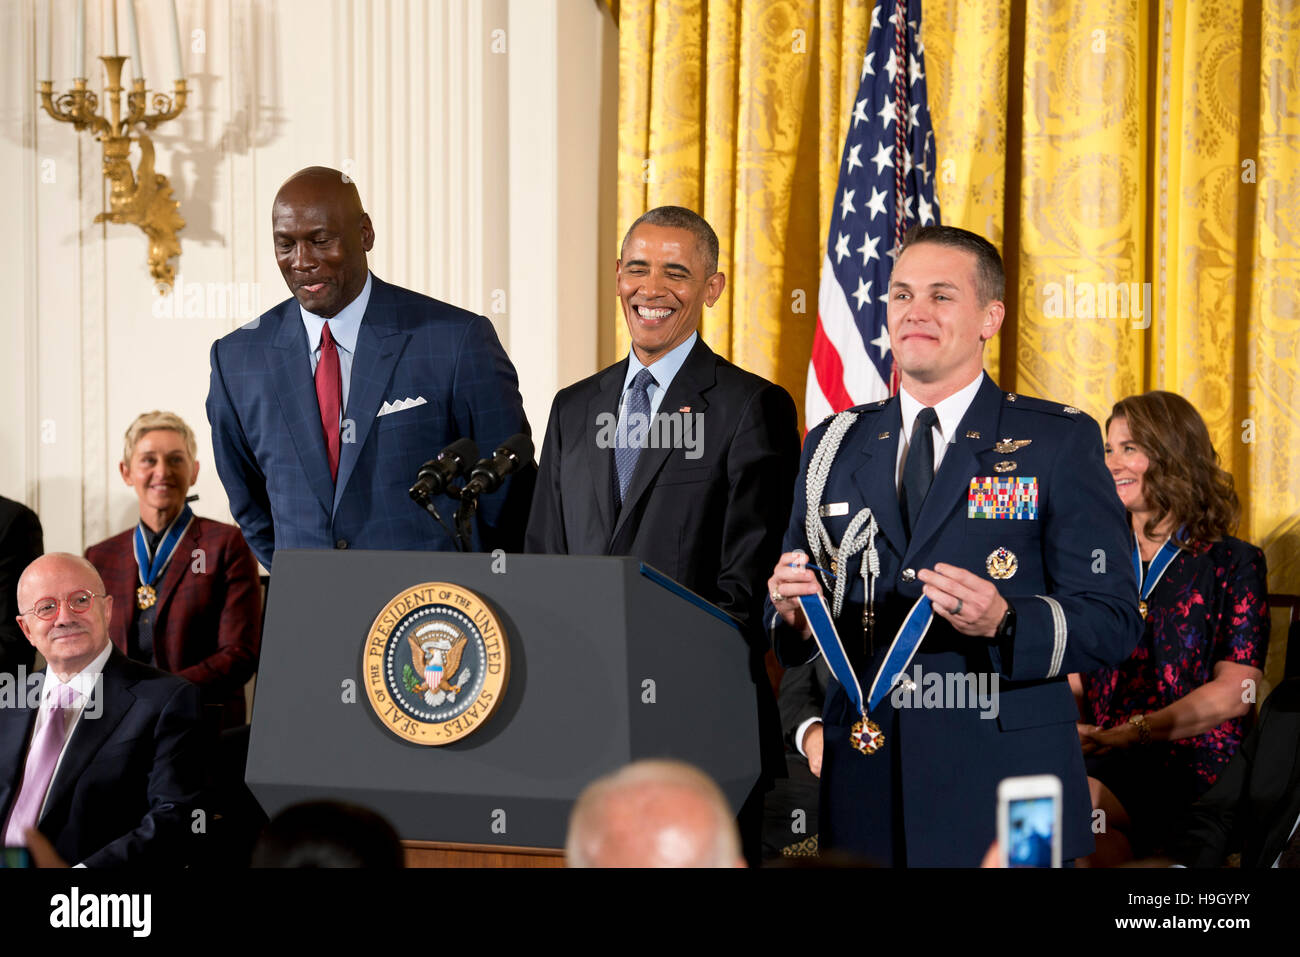 President Barack Obama awards the Medal of Freedom to Michael Jordan at the White House . Credit: Lynch/Alamy News Stock Photo - Alamy